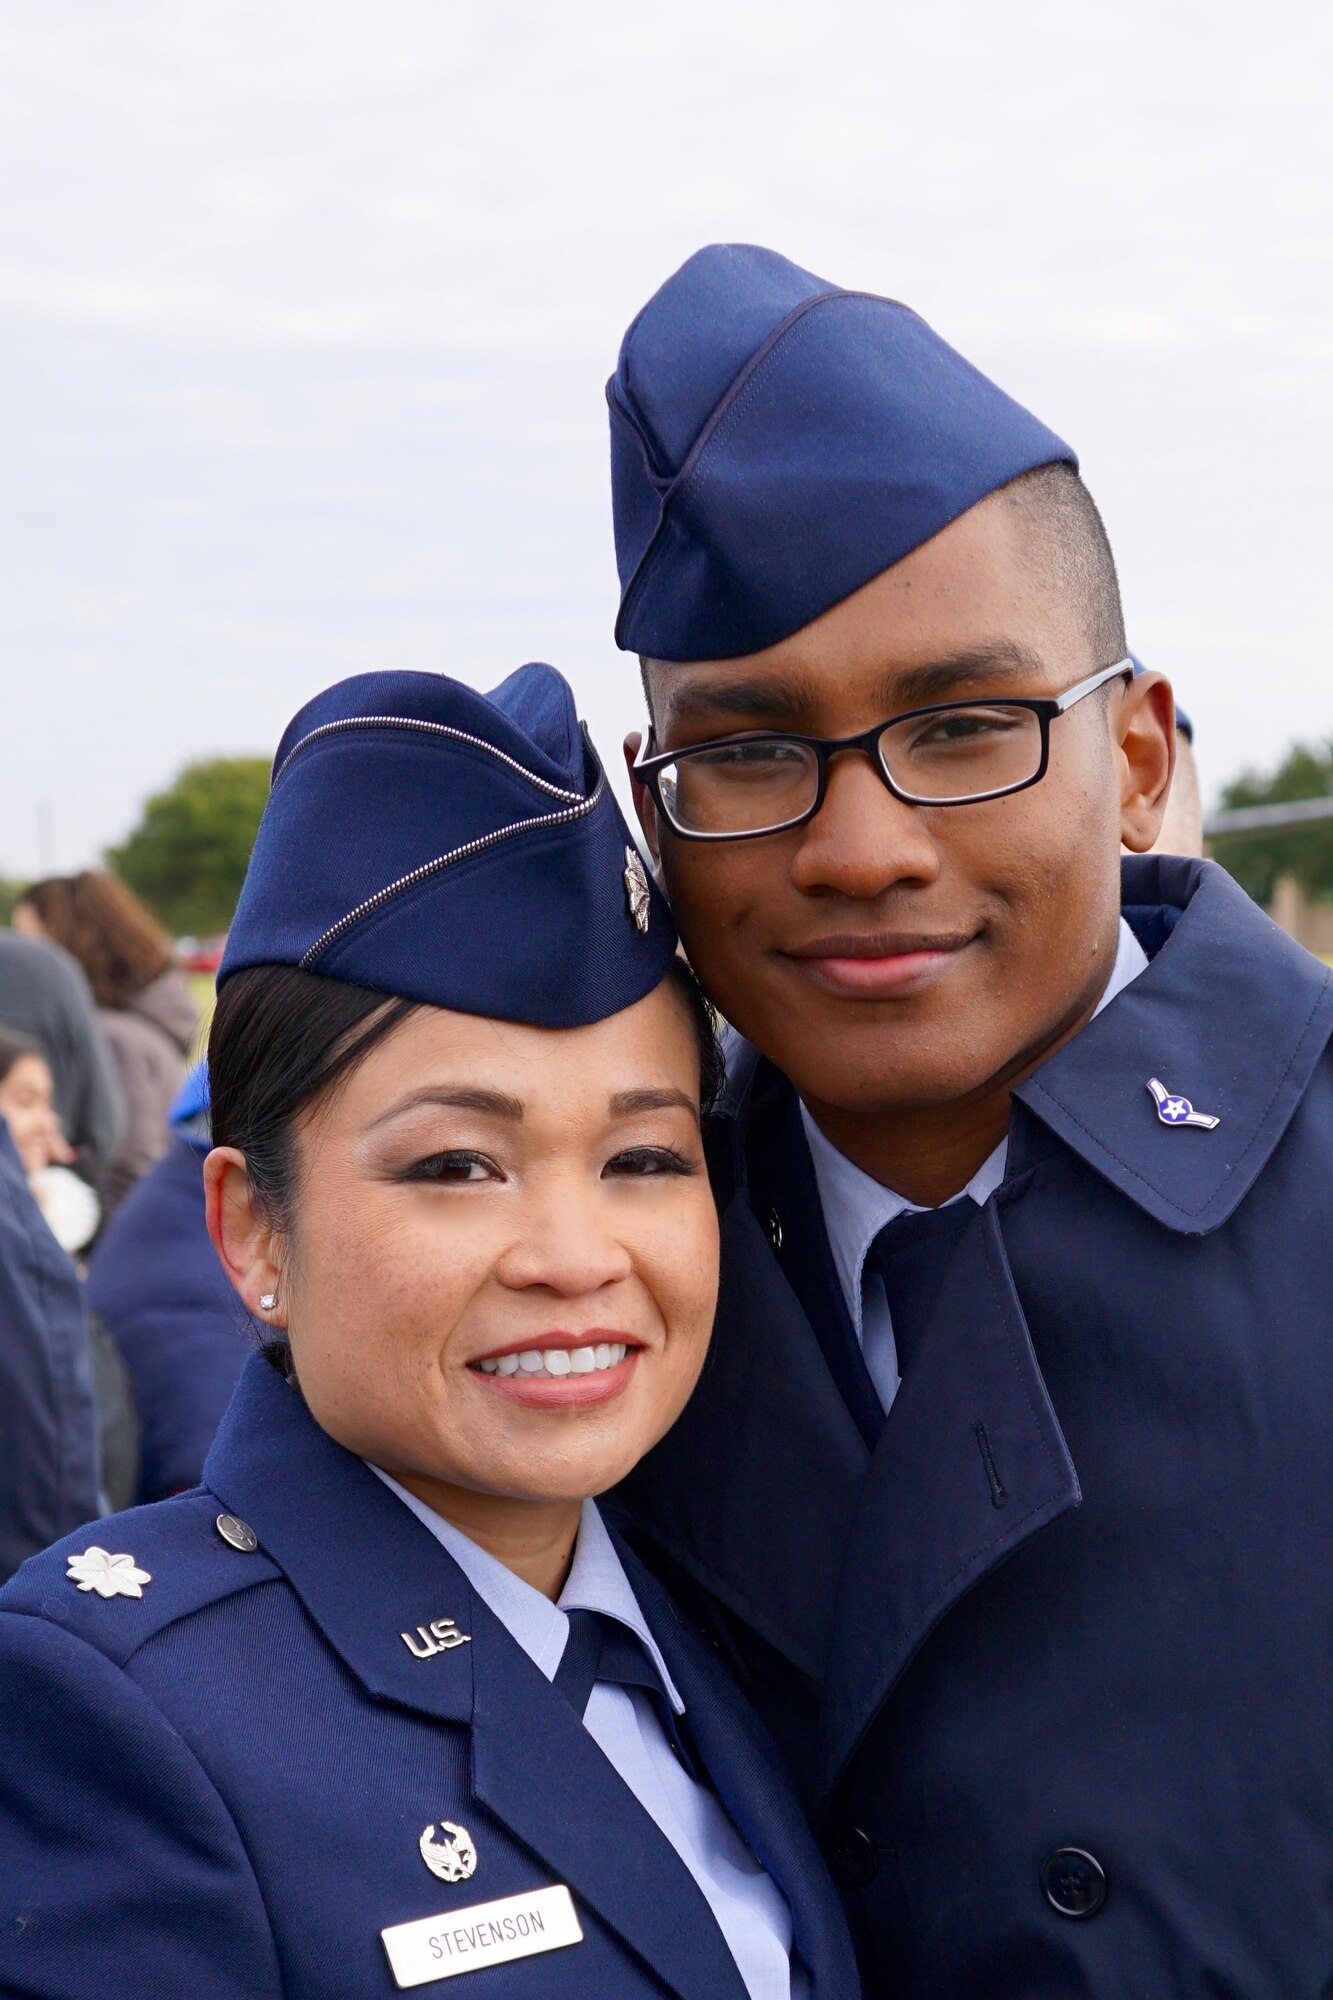 Lt. Col. Bonnie Stevenson, 49th Medical Operations Squadron commander, poses with her son, Airman Darrius Stevenson. Airman Stevenson graduated from Air Force Basic Military Training at Lackland Air Force Base on Dec. 9, 2016. Airman Stevenson is currently receiving his Cyber Space Operation training at Keesler Air Force Base. (Photo courtesy of Lt. Col. Bonnie Stevenson)